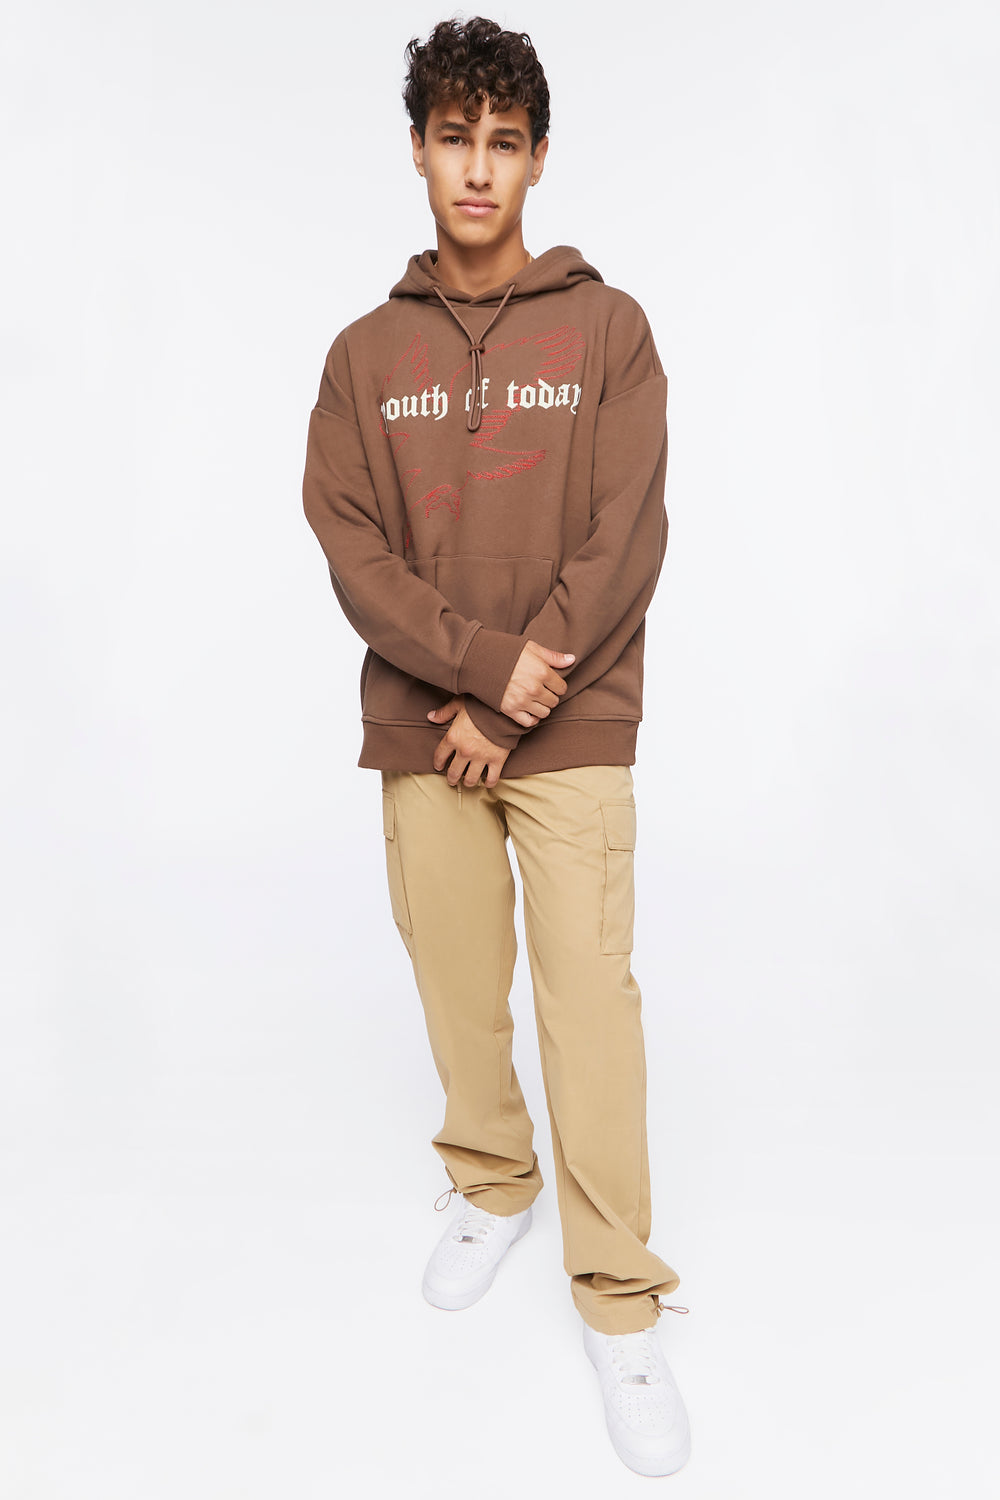 Youth of Today Graphic Hoodie Brown